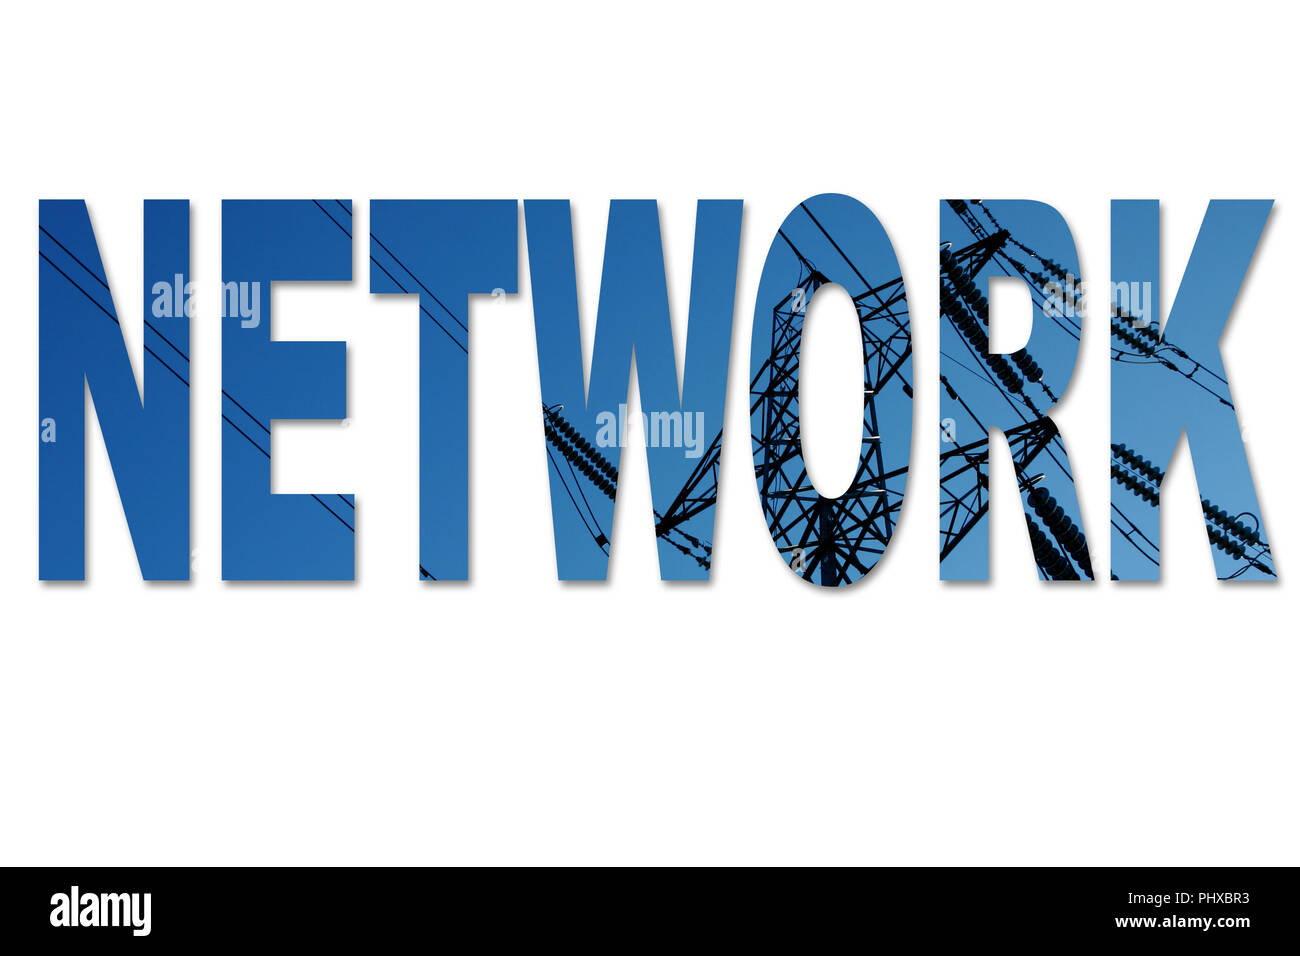 The word network with an image of an electricity pylon and power lines inside the text Stock Photo